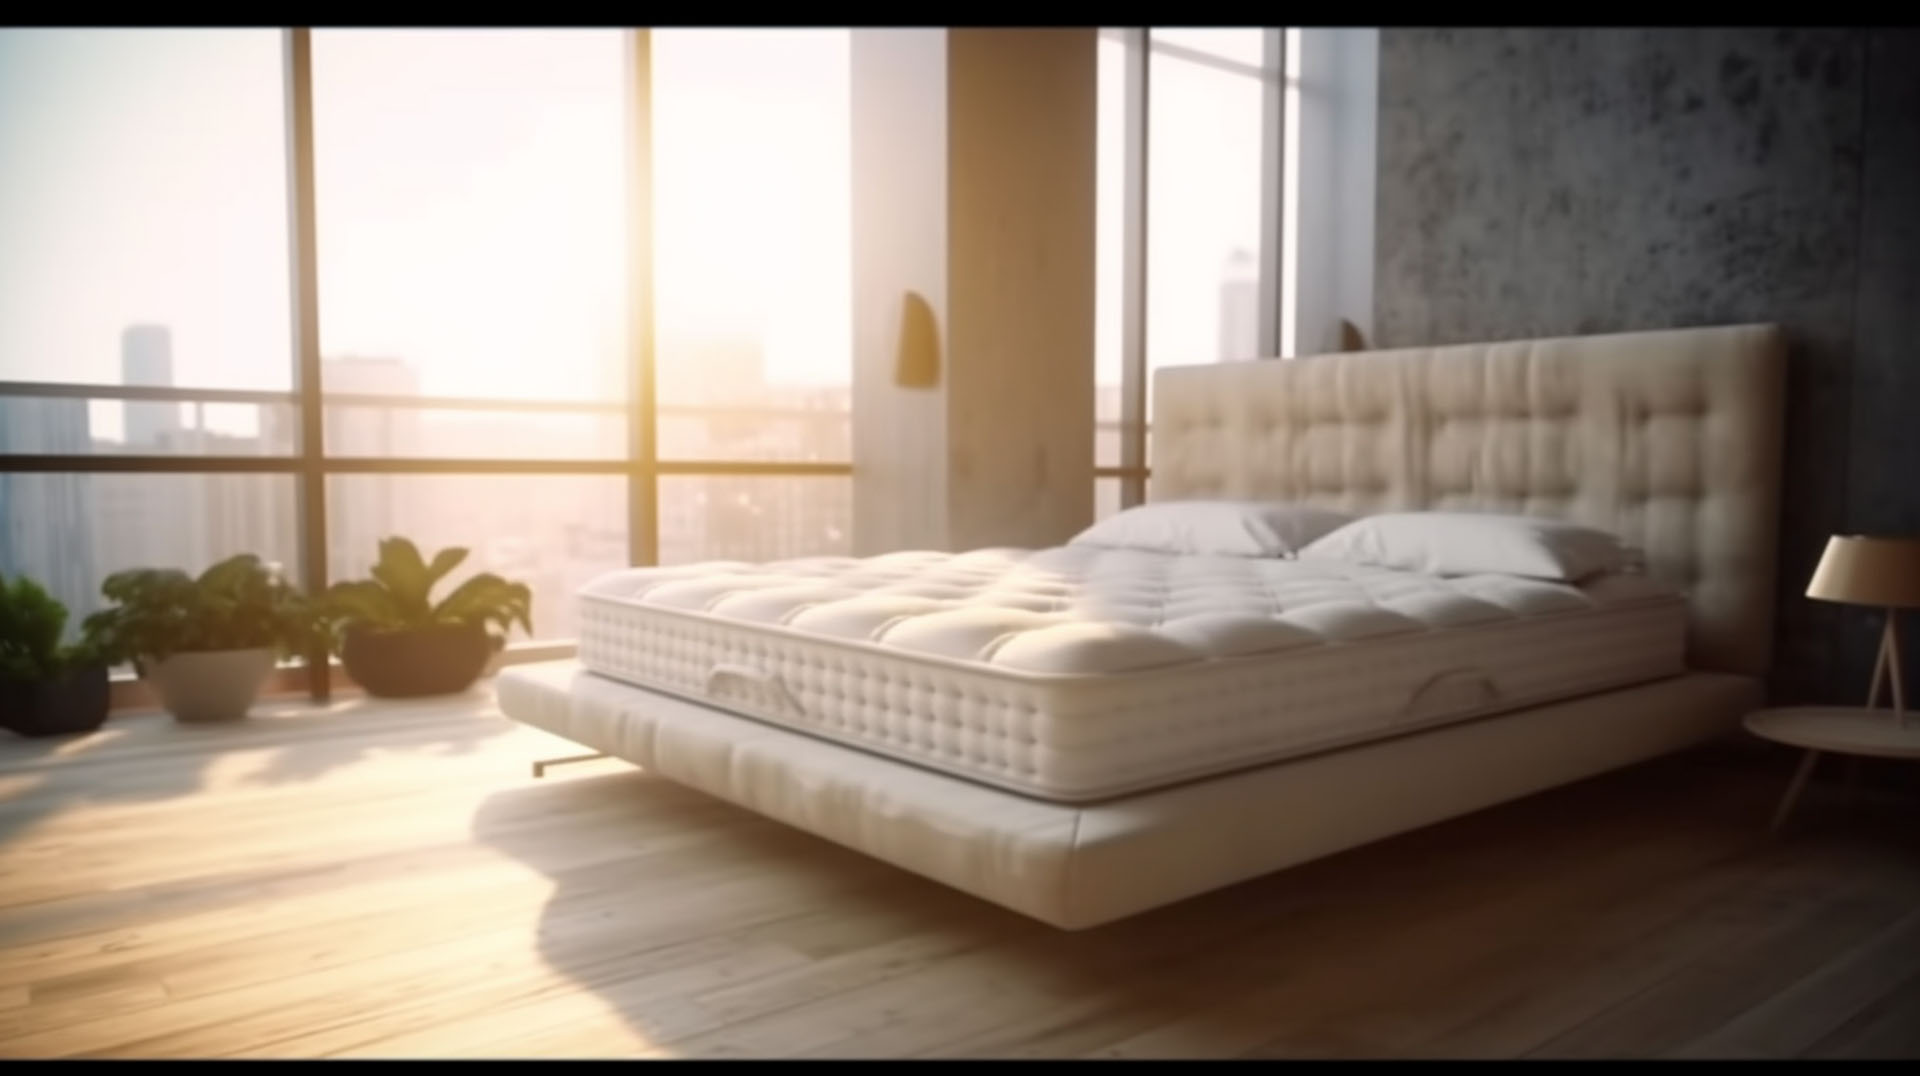 Arcadia organic mattresses are the perfect way to get a good night's sleep without sacrificing comfort or your health